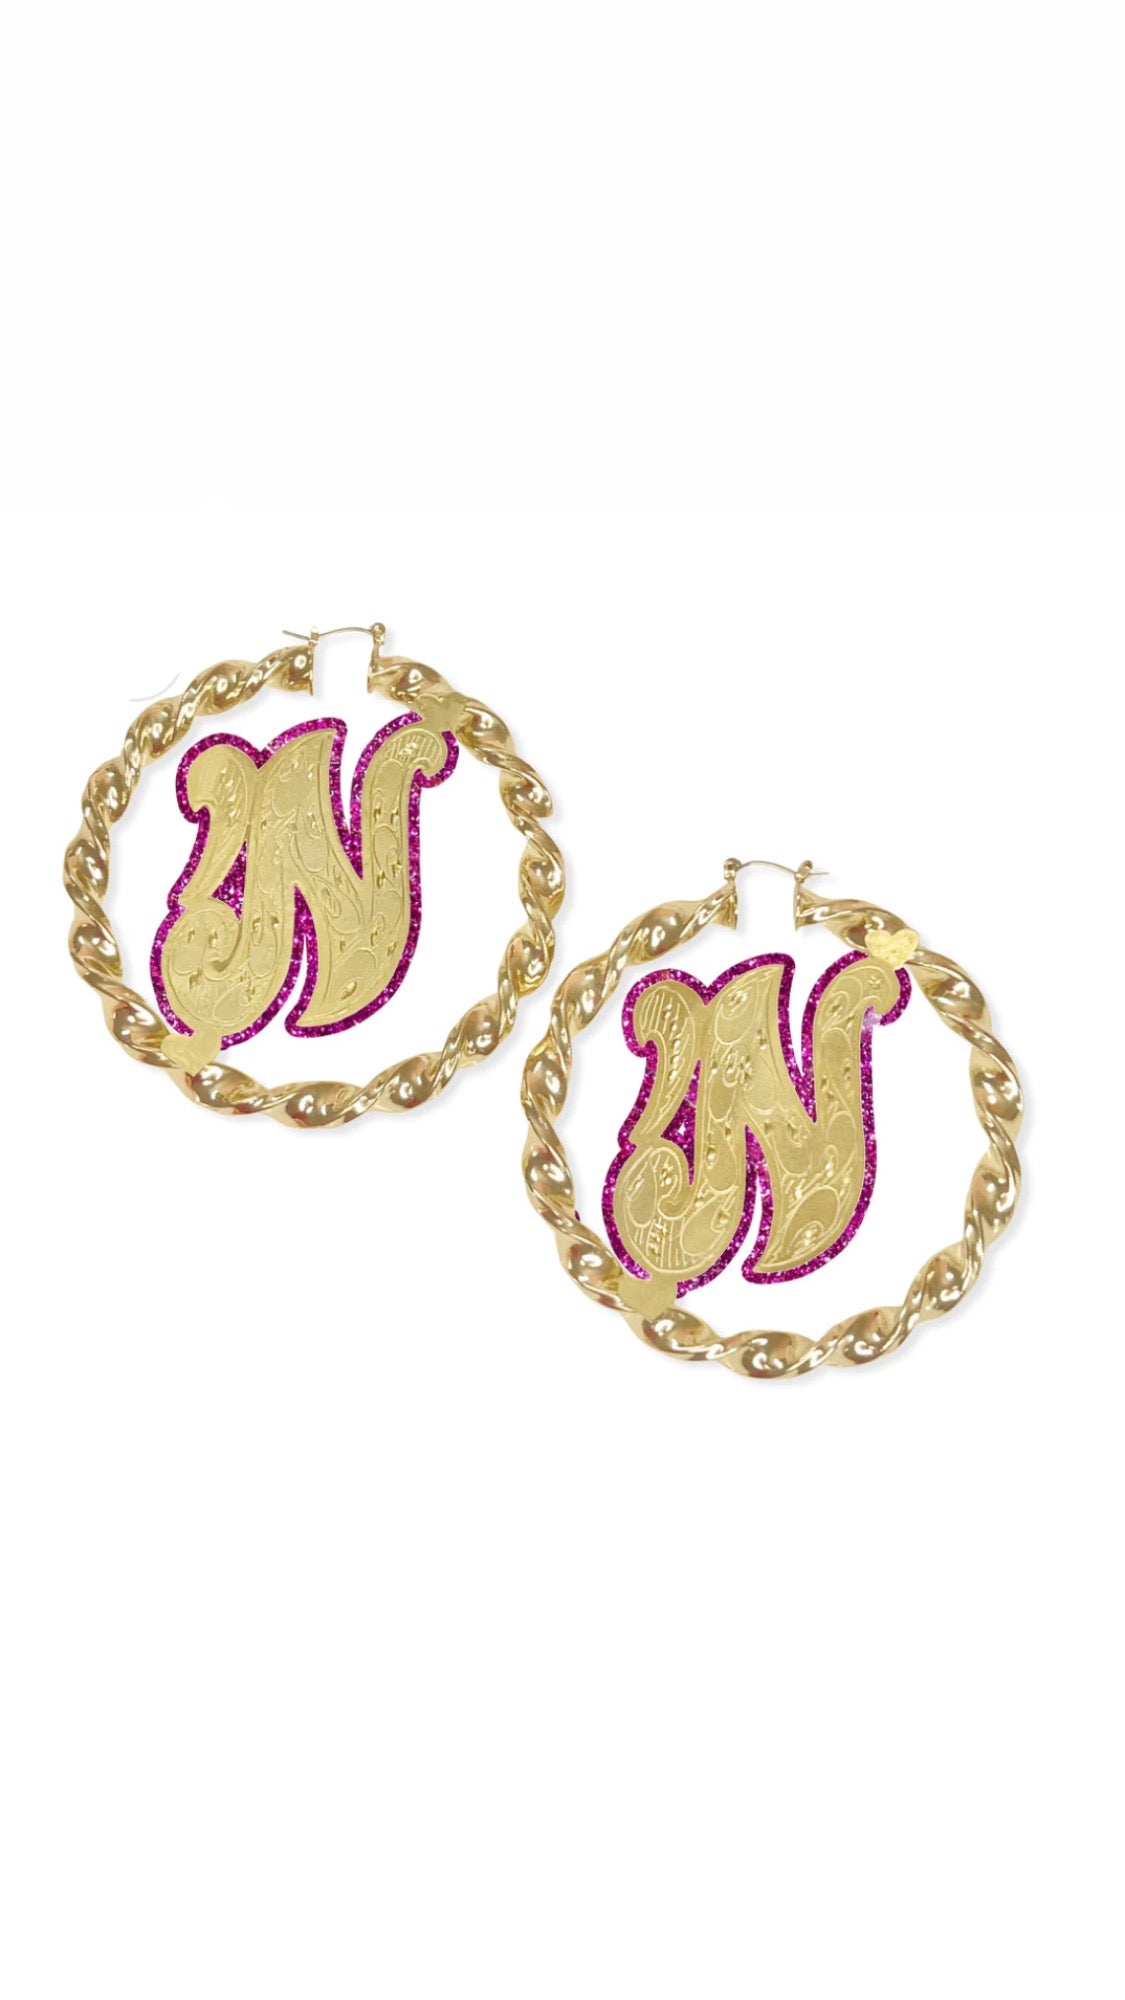 Initial gold or Silver plated twist earrings